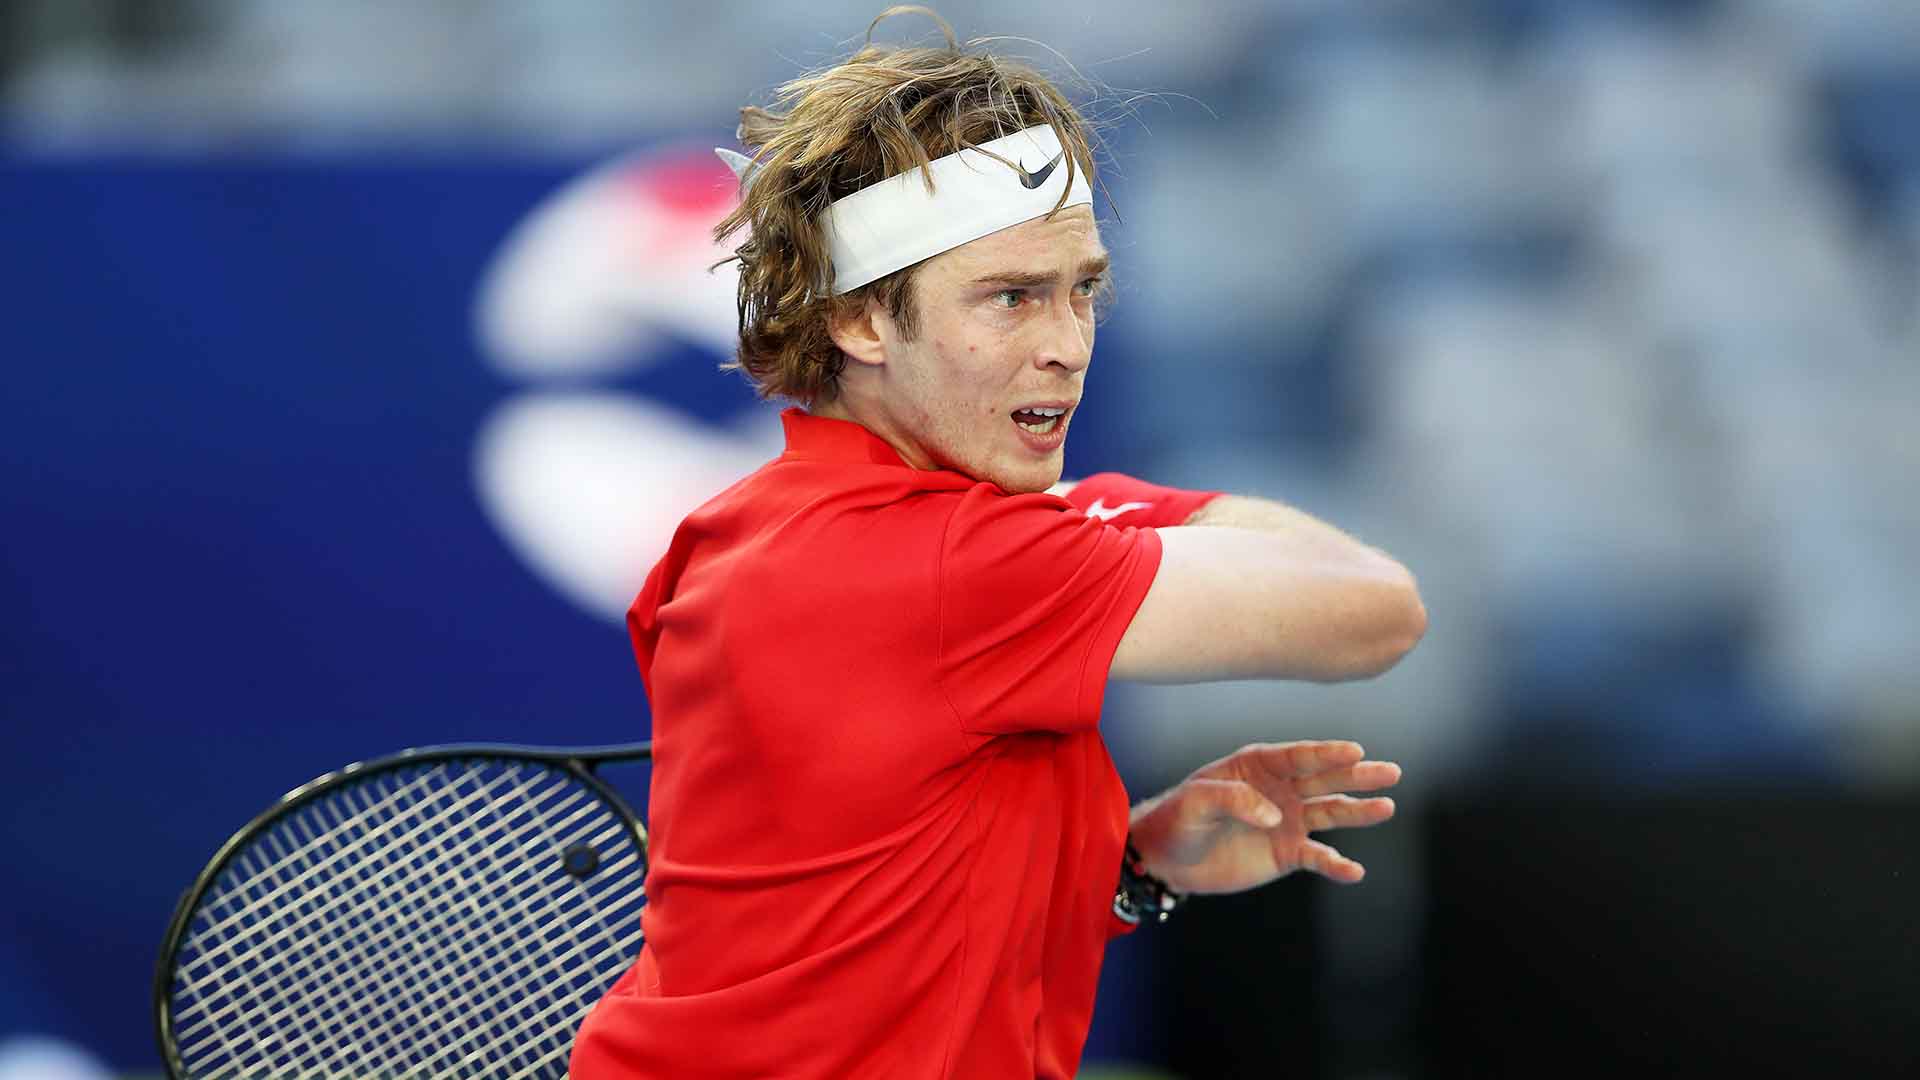 <a href='https://www.atptour.com/en/players/andrey-rublev/re44/overview'>Andrey Rublev</a> improves to 2-0 in <a href='https://www.atptour.com/en/tournaments/atp-cup/8888/overview'>ATP Cup</a> singles matches.